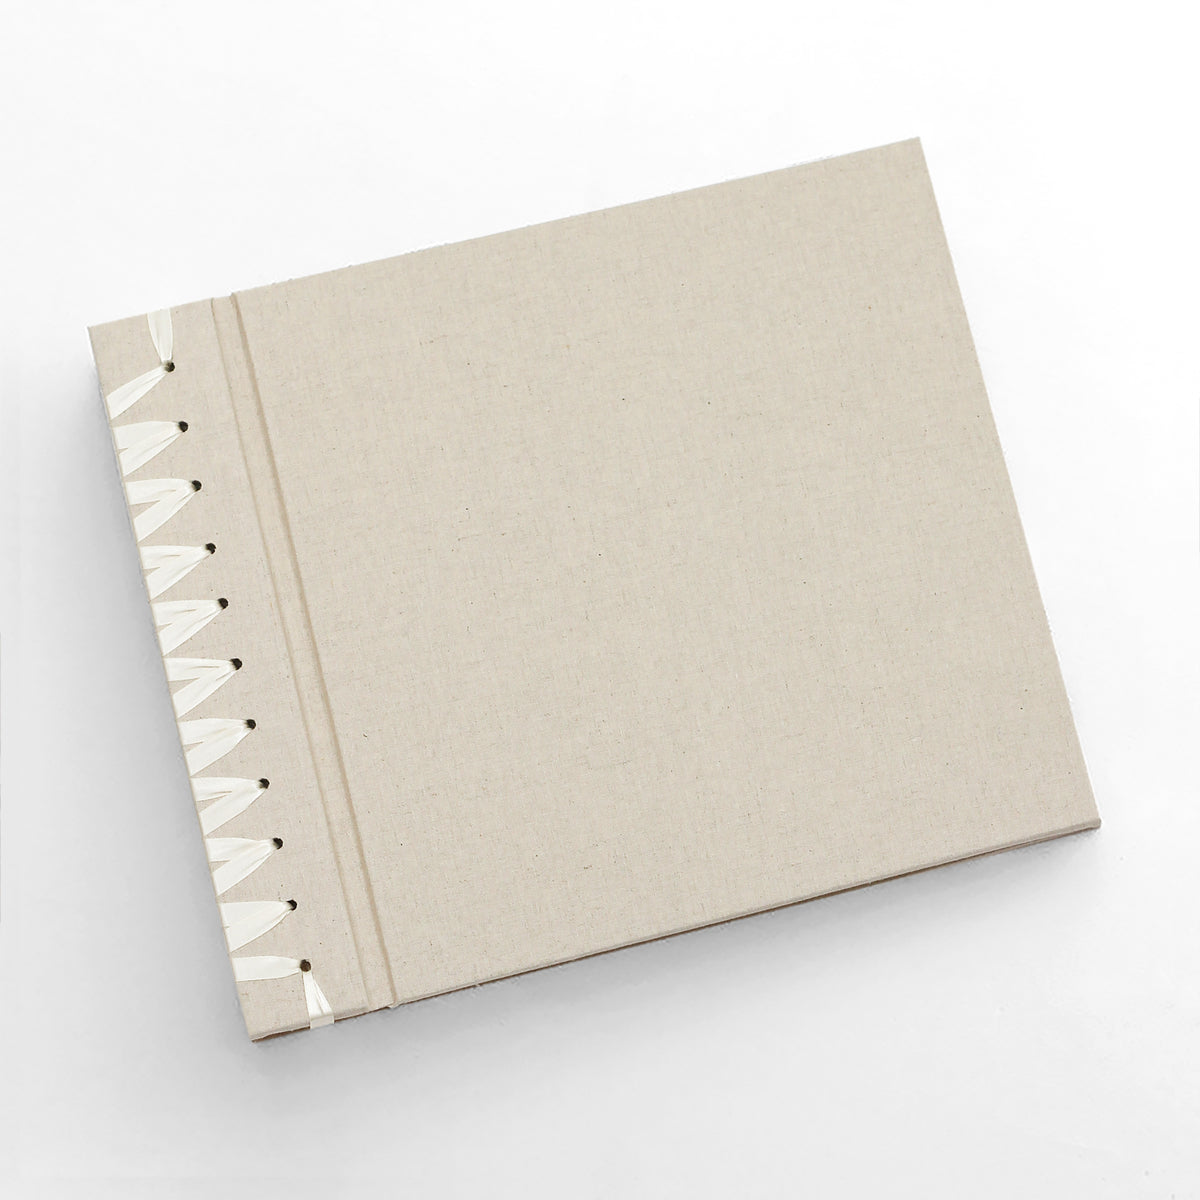 Deluxe 12 x 15 Paper Page Album | Cover: Natural Linen | Available Personalized